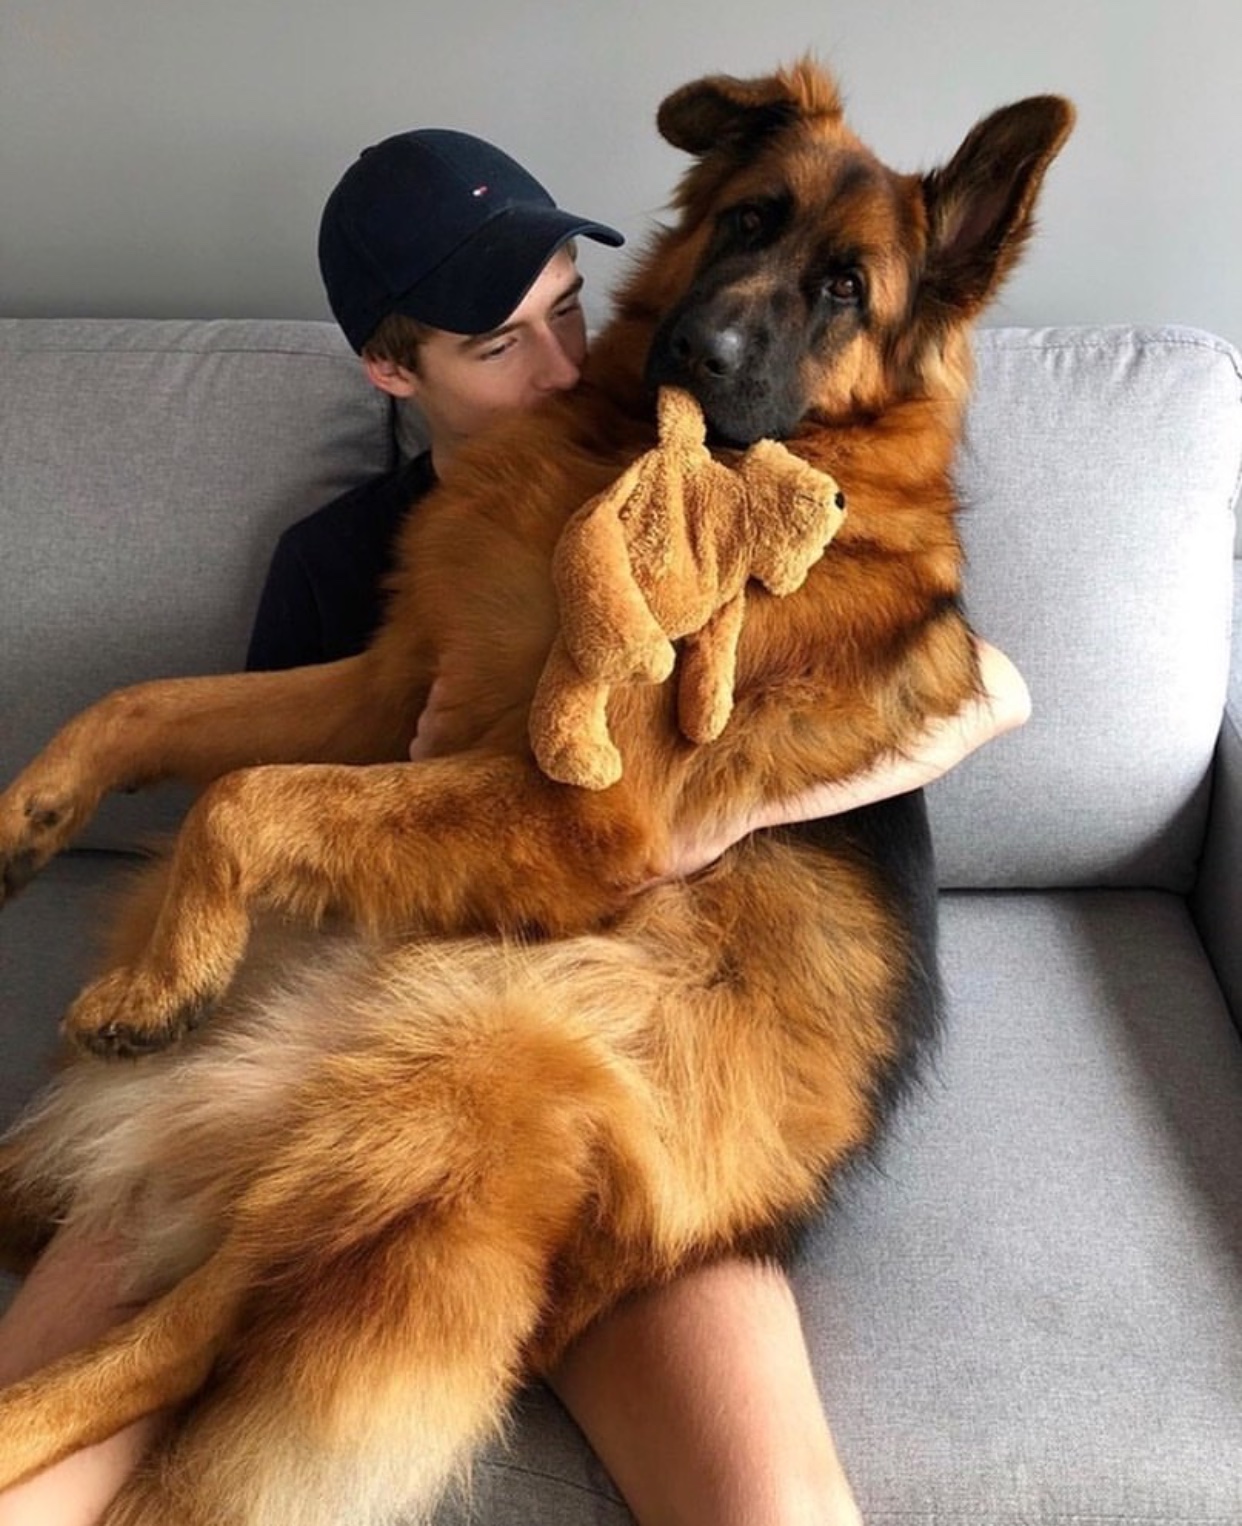 A man sitting on the couch with a German Shepherd sitting on his lap with a teddy bear stuffed toy in its mouth